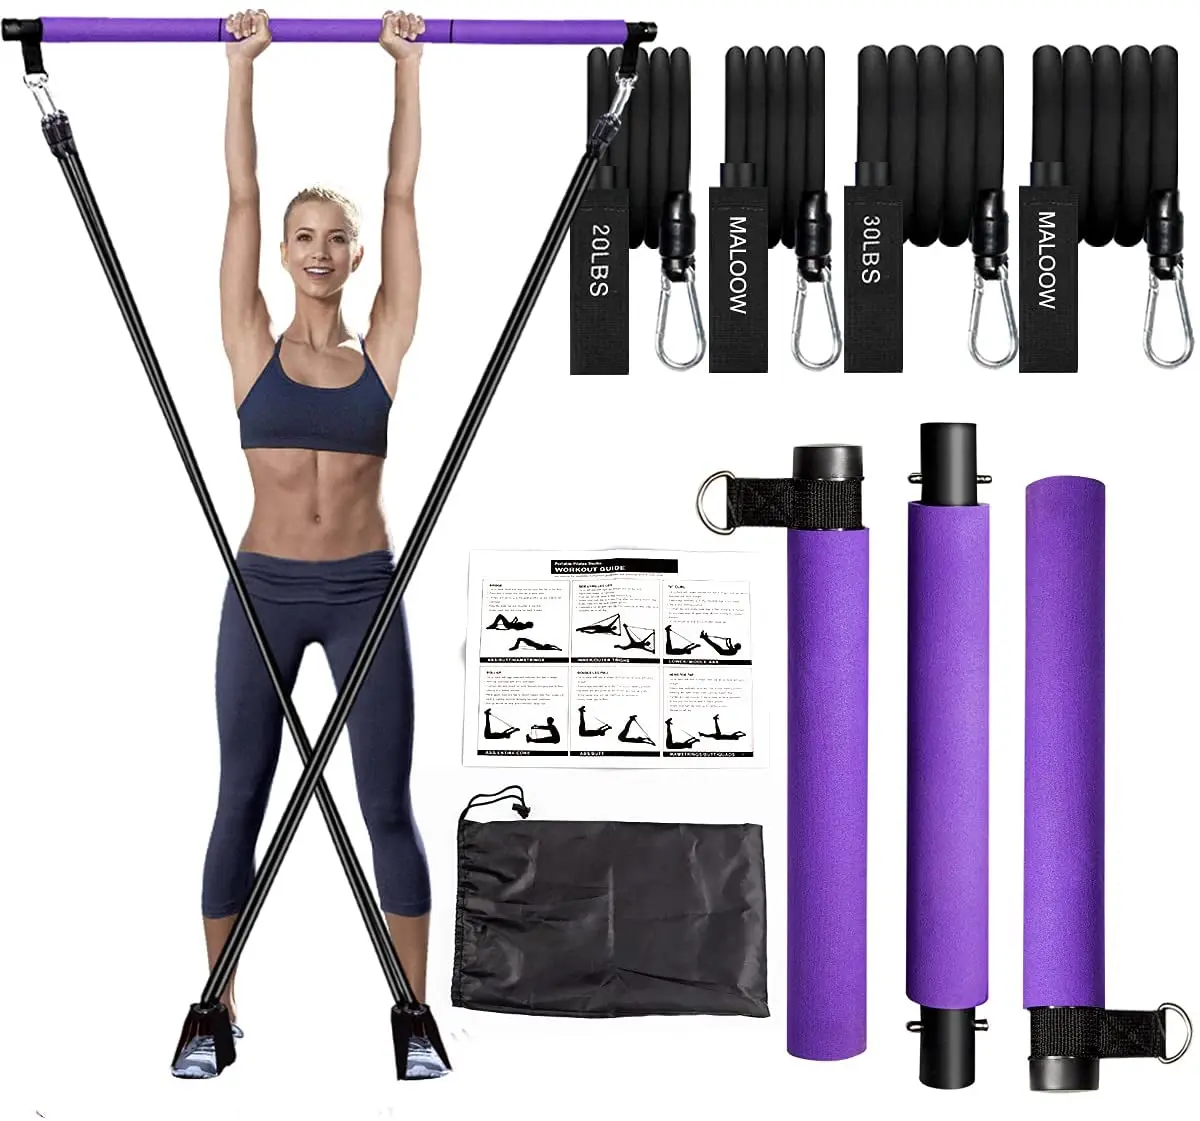 

Bilink 3 section portable yoga pilates bar kit with resistance bands exercise stick, Pueple